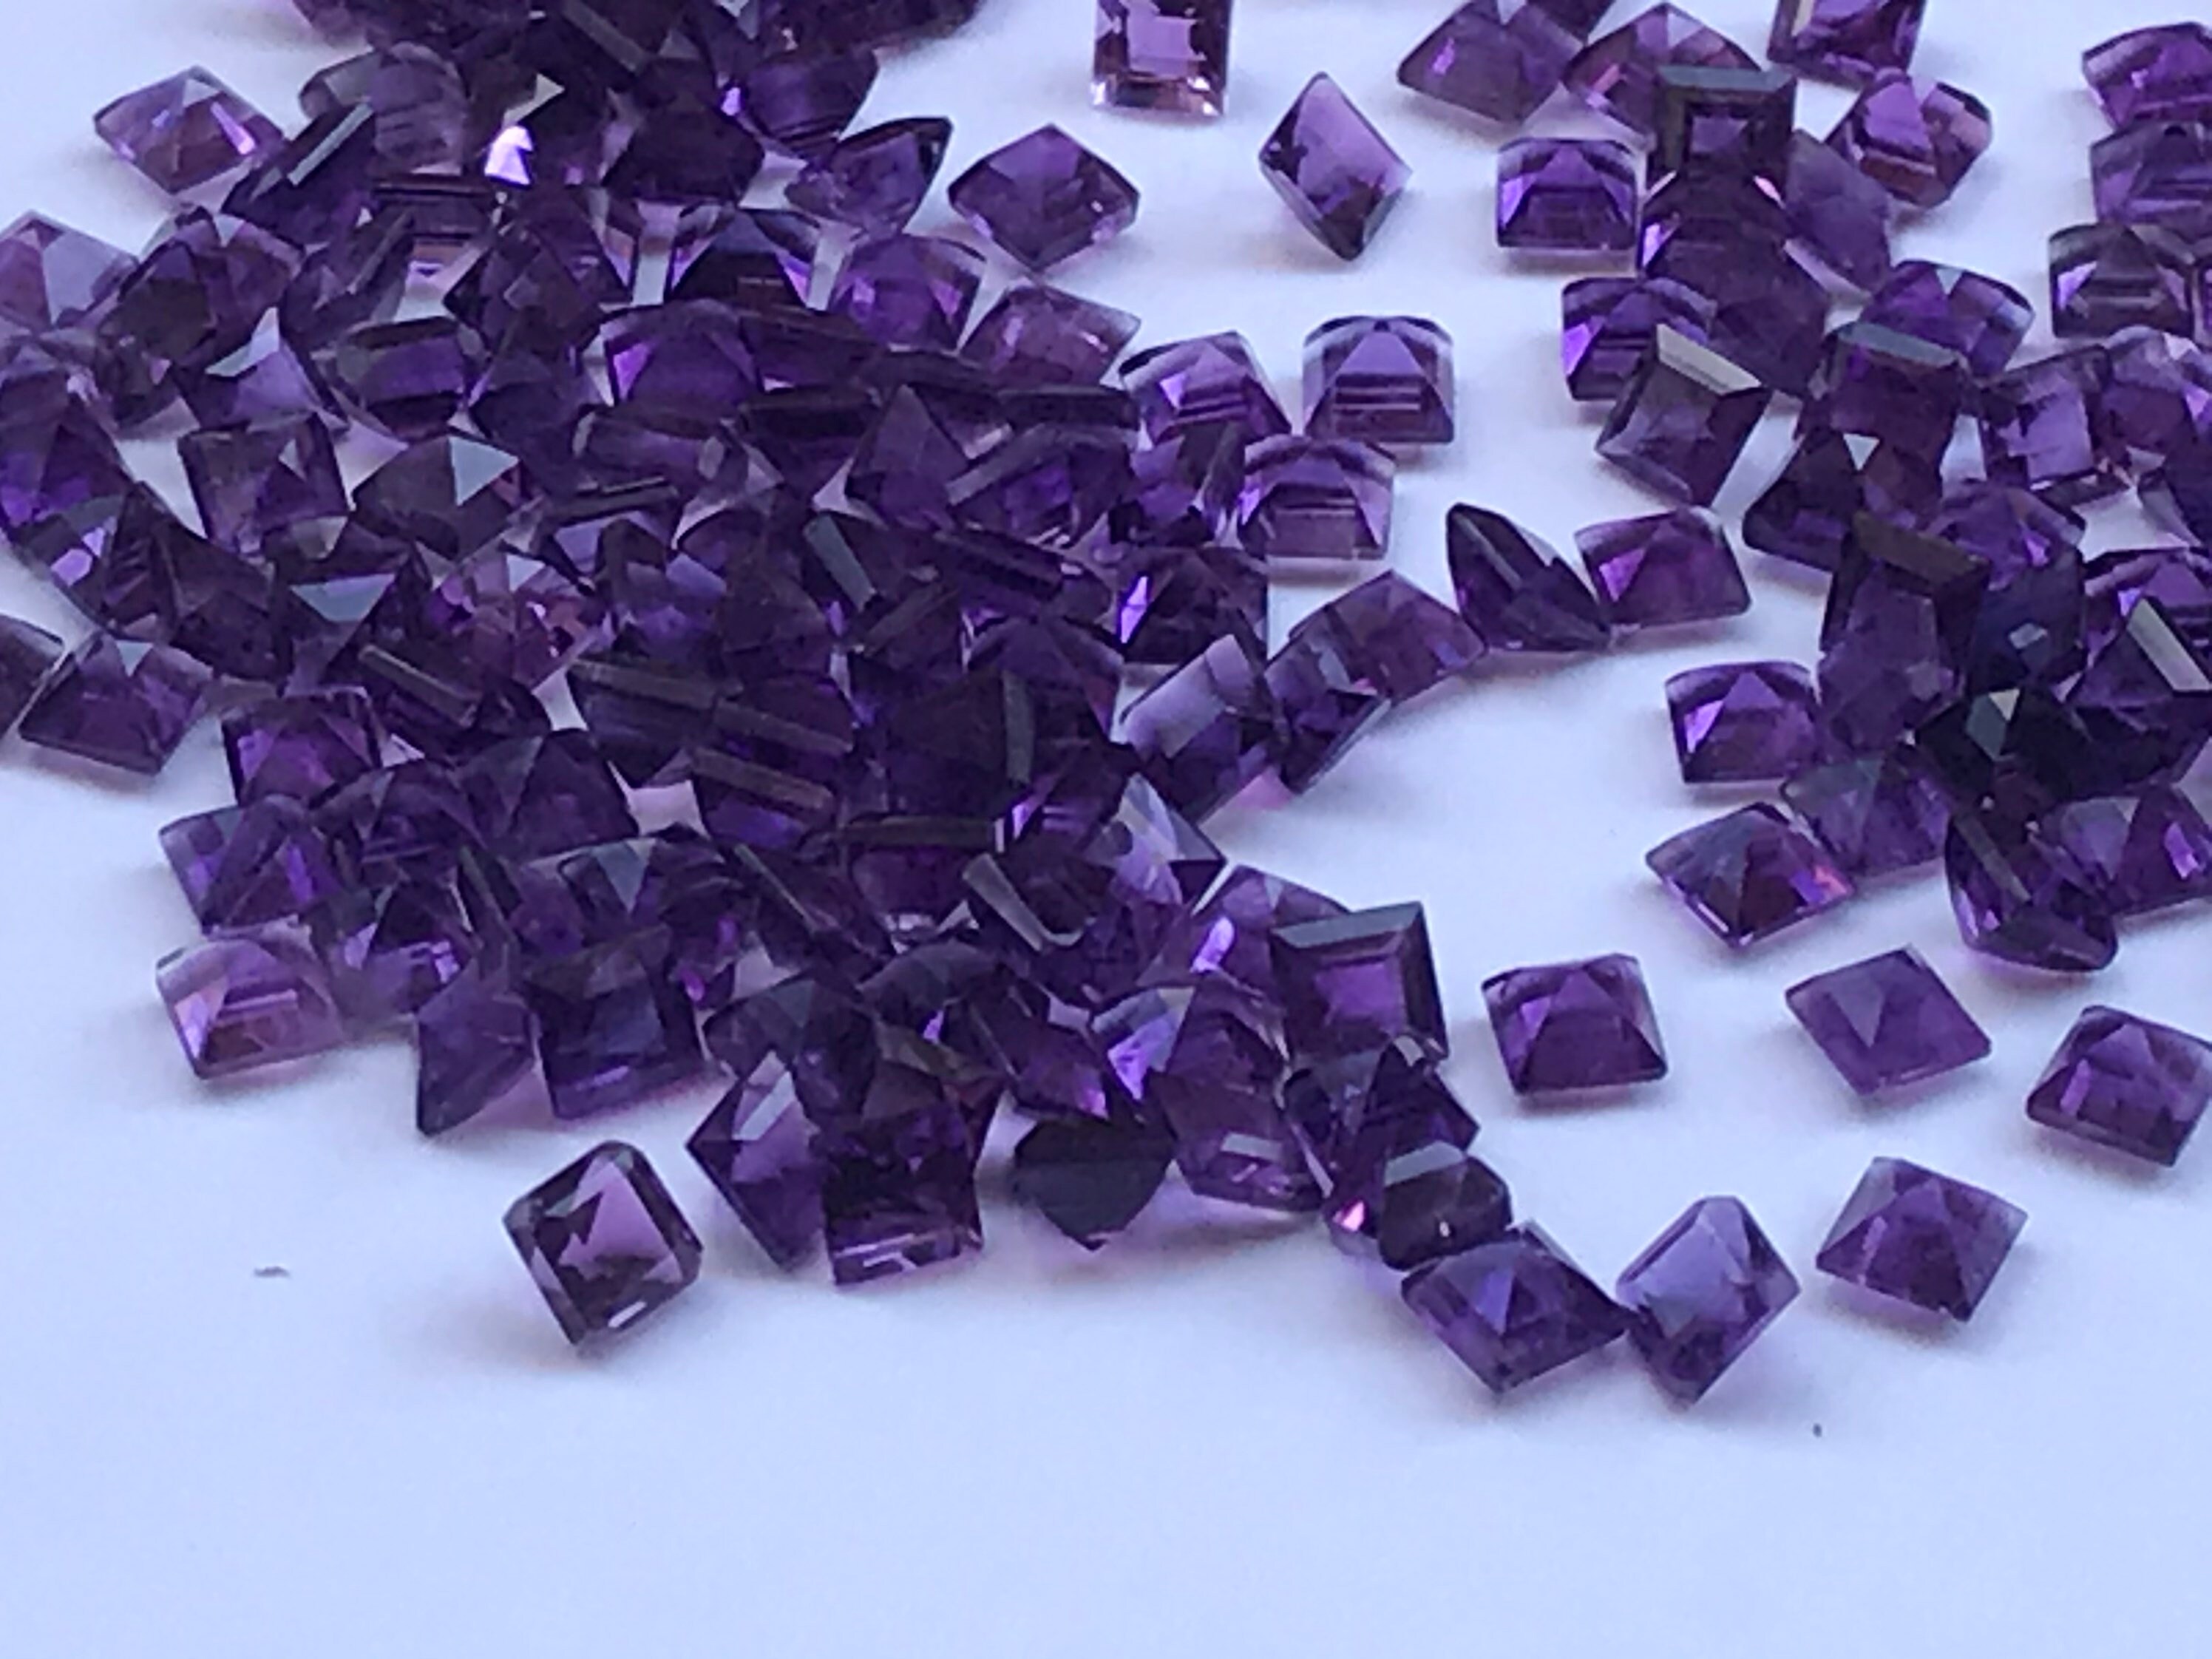 3mm Square Amethyst Cut Stone Lot Faceted Amethyst Square | Etsy